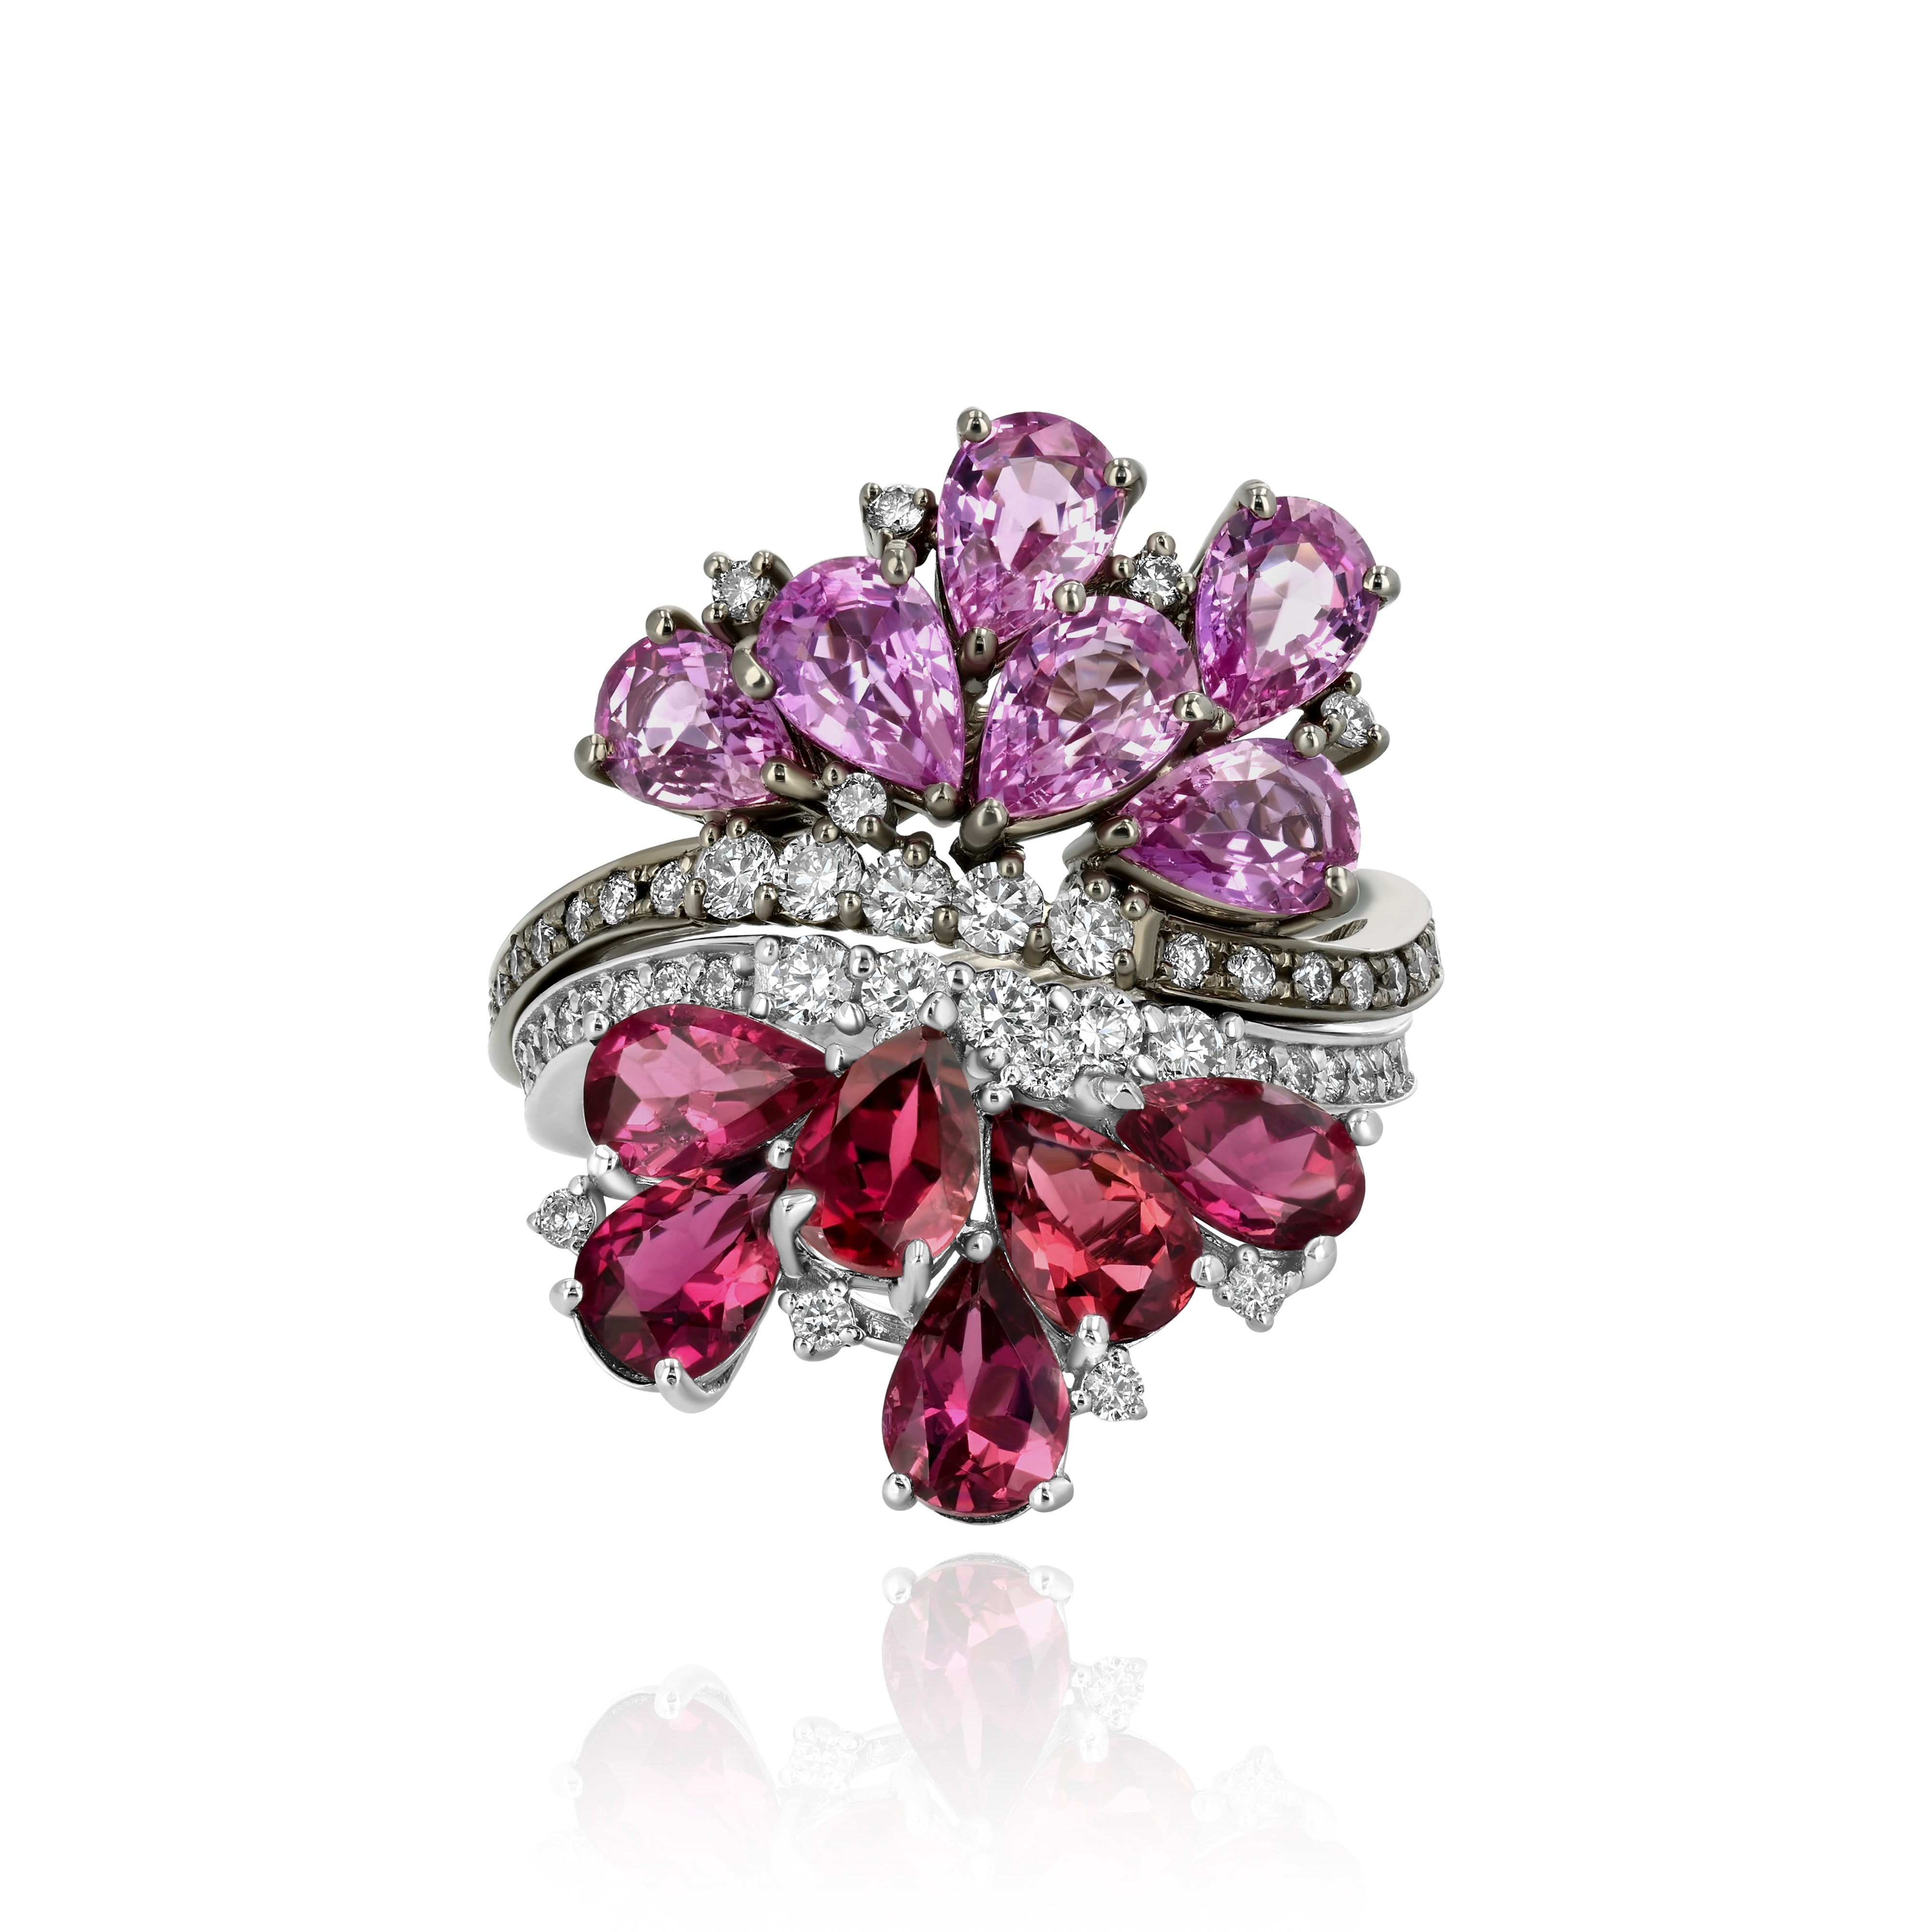 Diamond dual Ring - half Rhodium Plated Gold and Pink Sapphire, half White Gold and Rubellite, Large